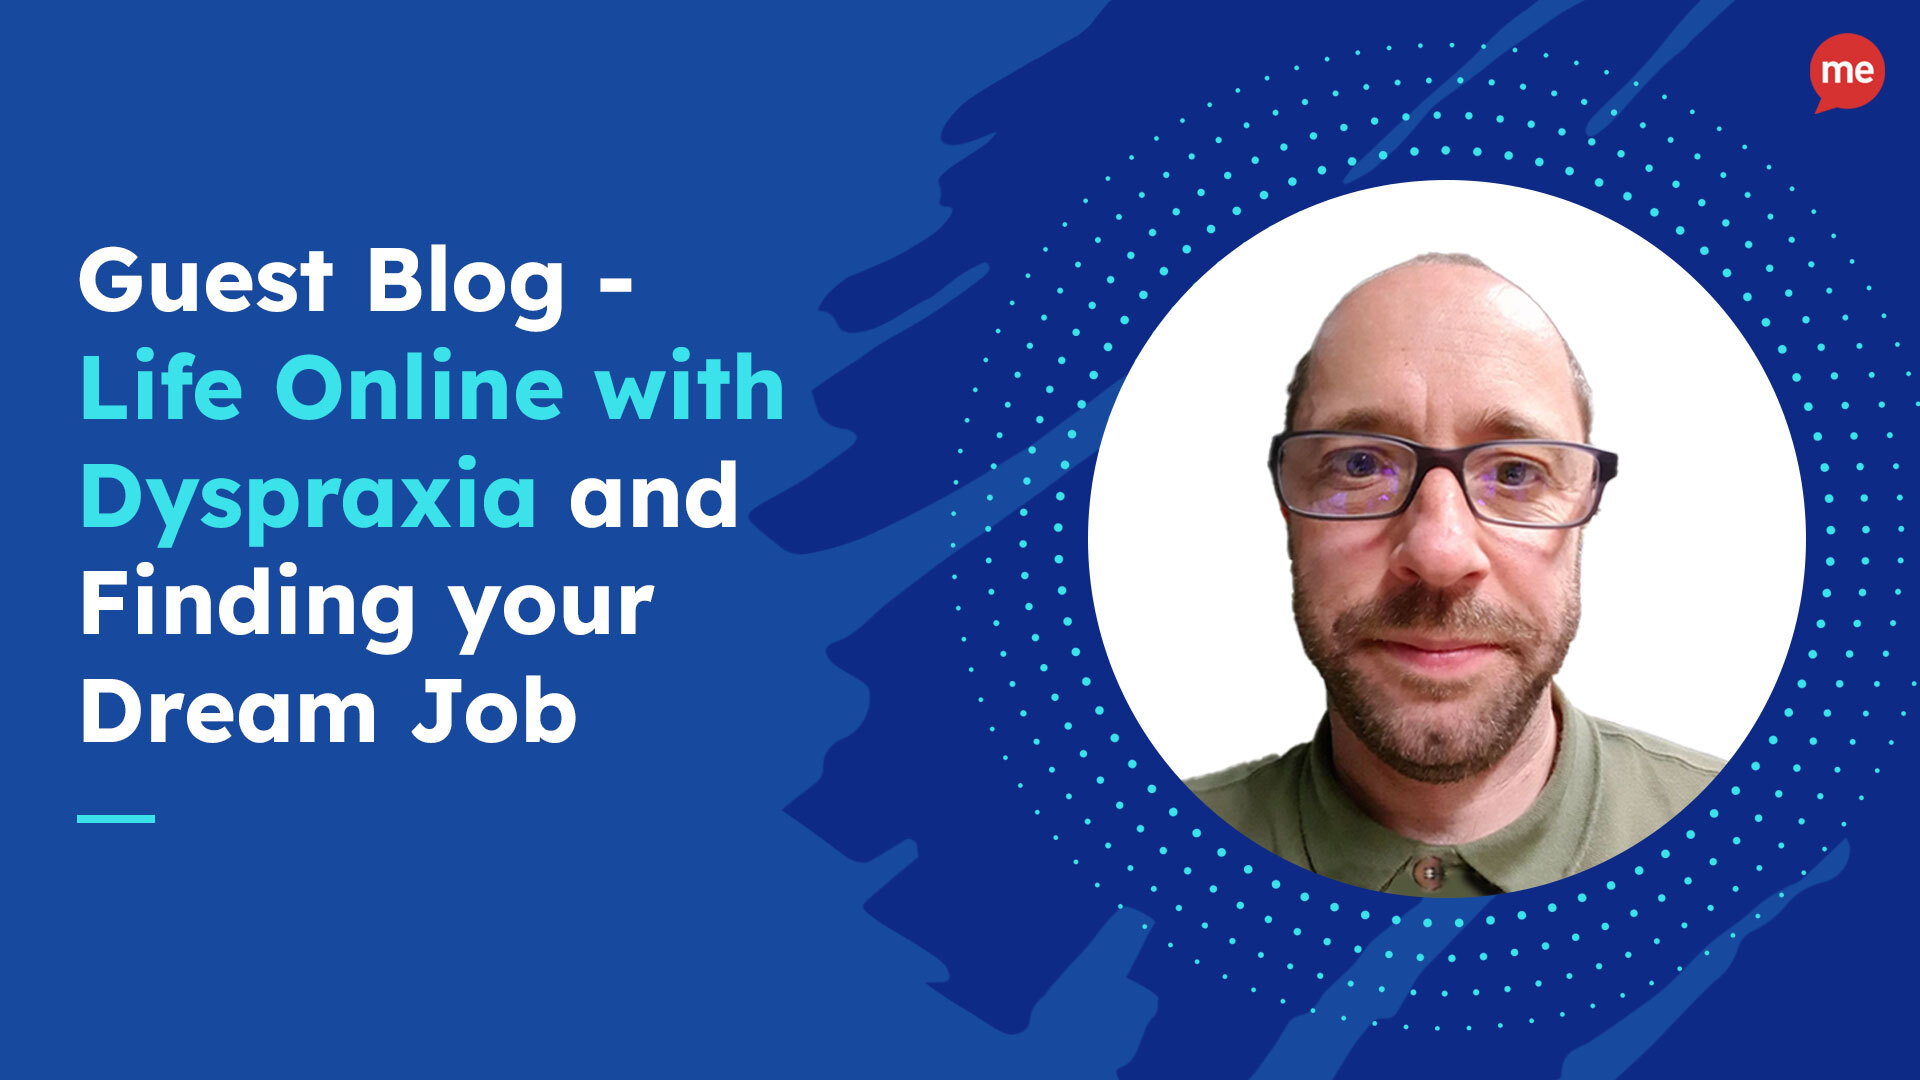 Guest Blog - Life online with Dyspraxia and finding your dream job